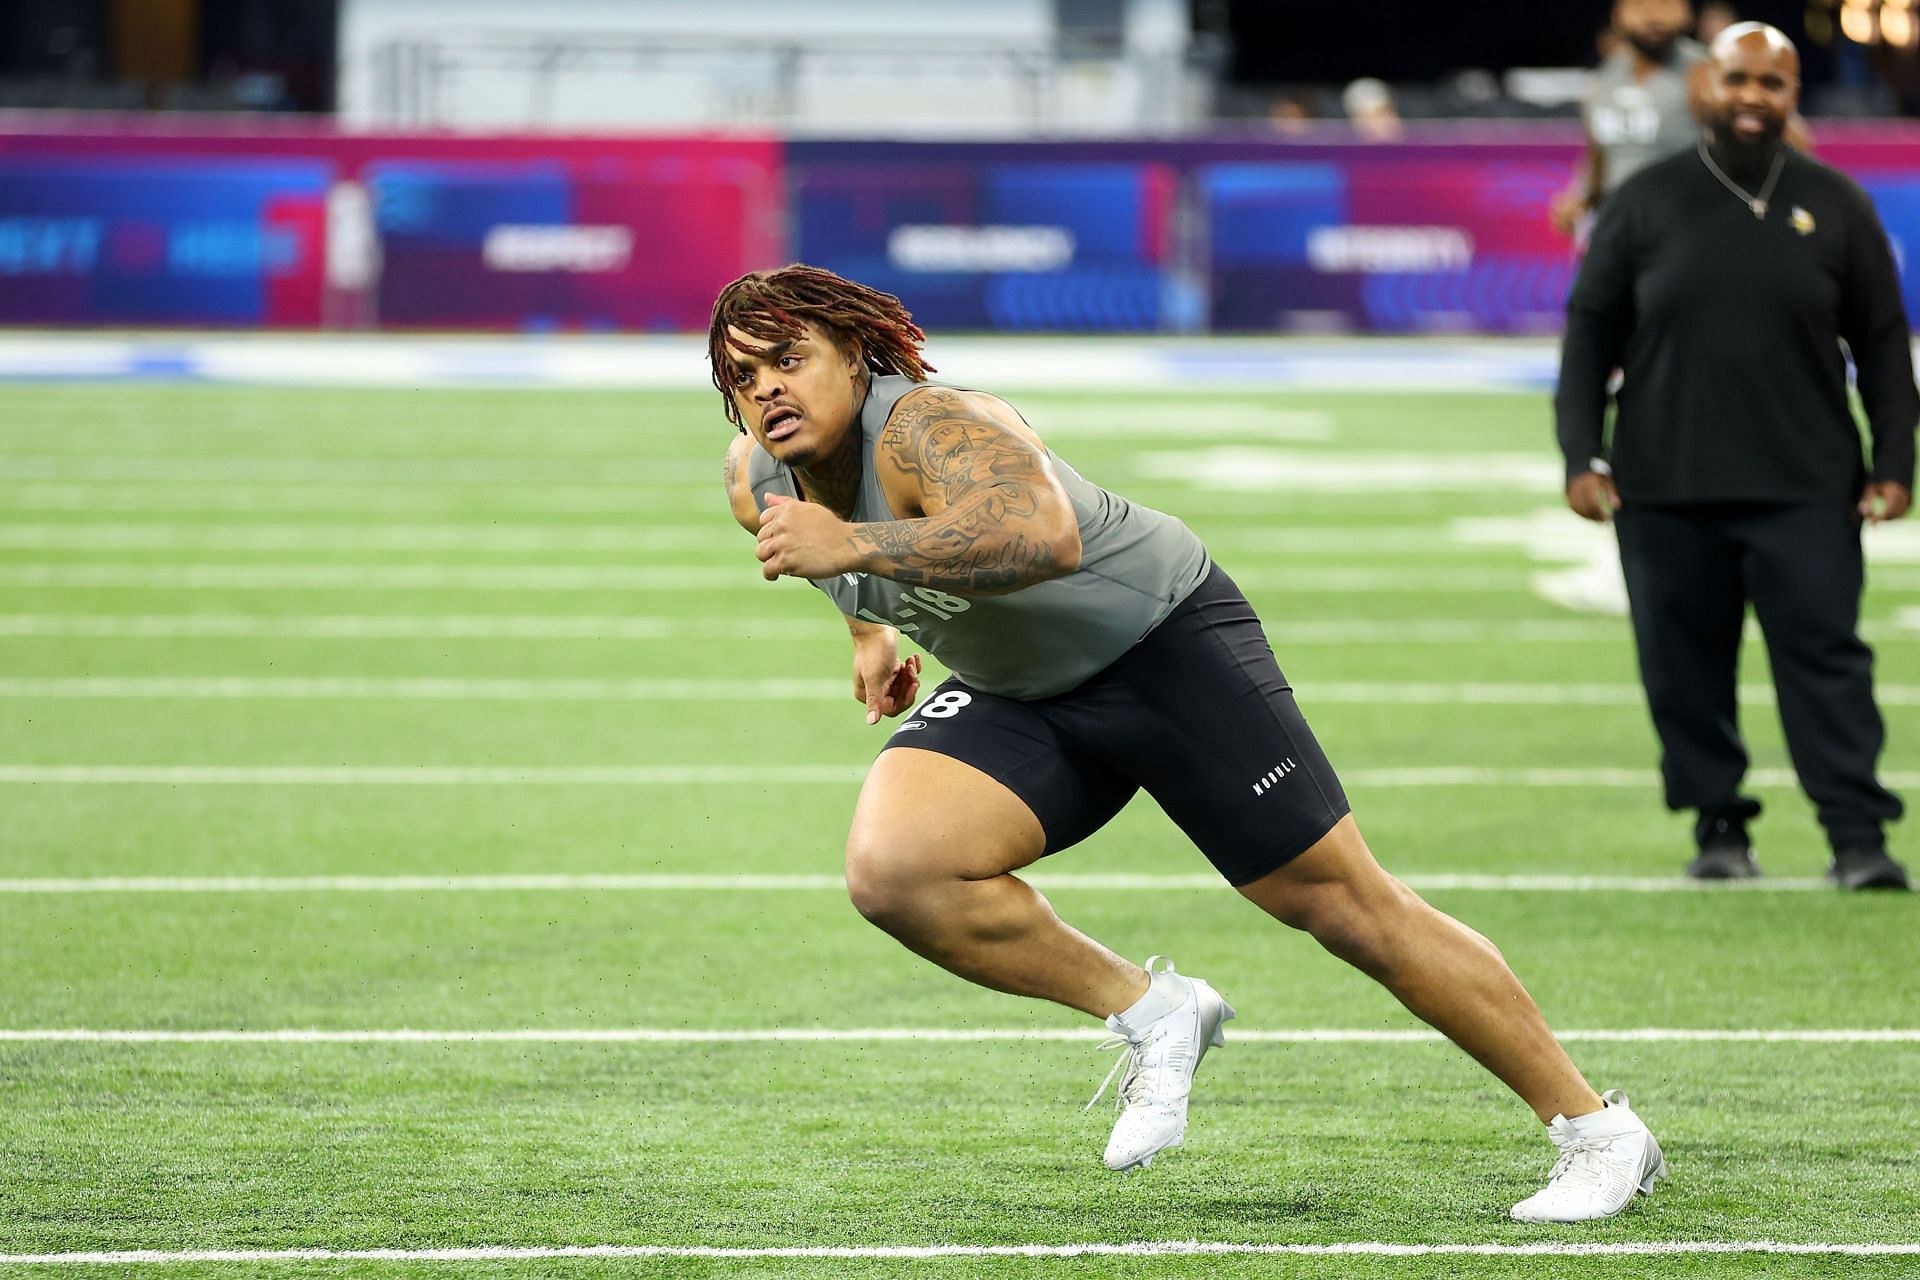 Byron Murphy #DL18 of Texas participates in a drill during the NFL Combine